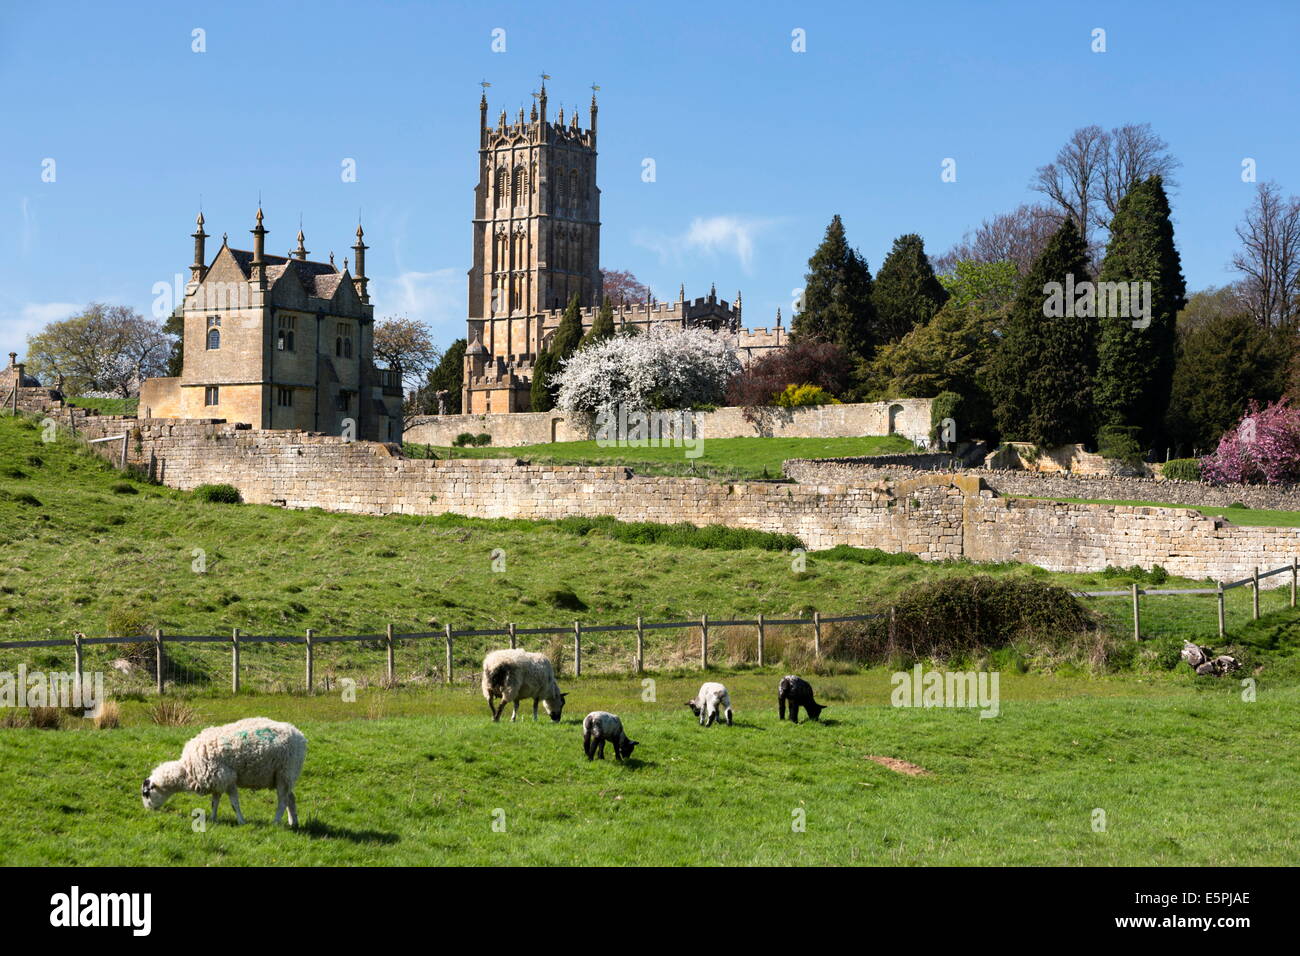 St James Church, Chipping Campden, Cotswolds, Gloucestershire, England, Regno Unito, Europa Foto Stock